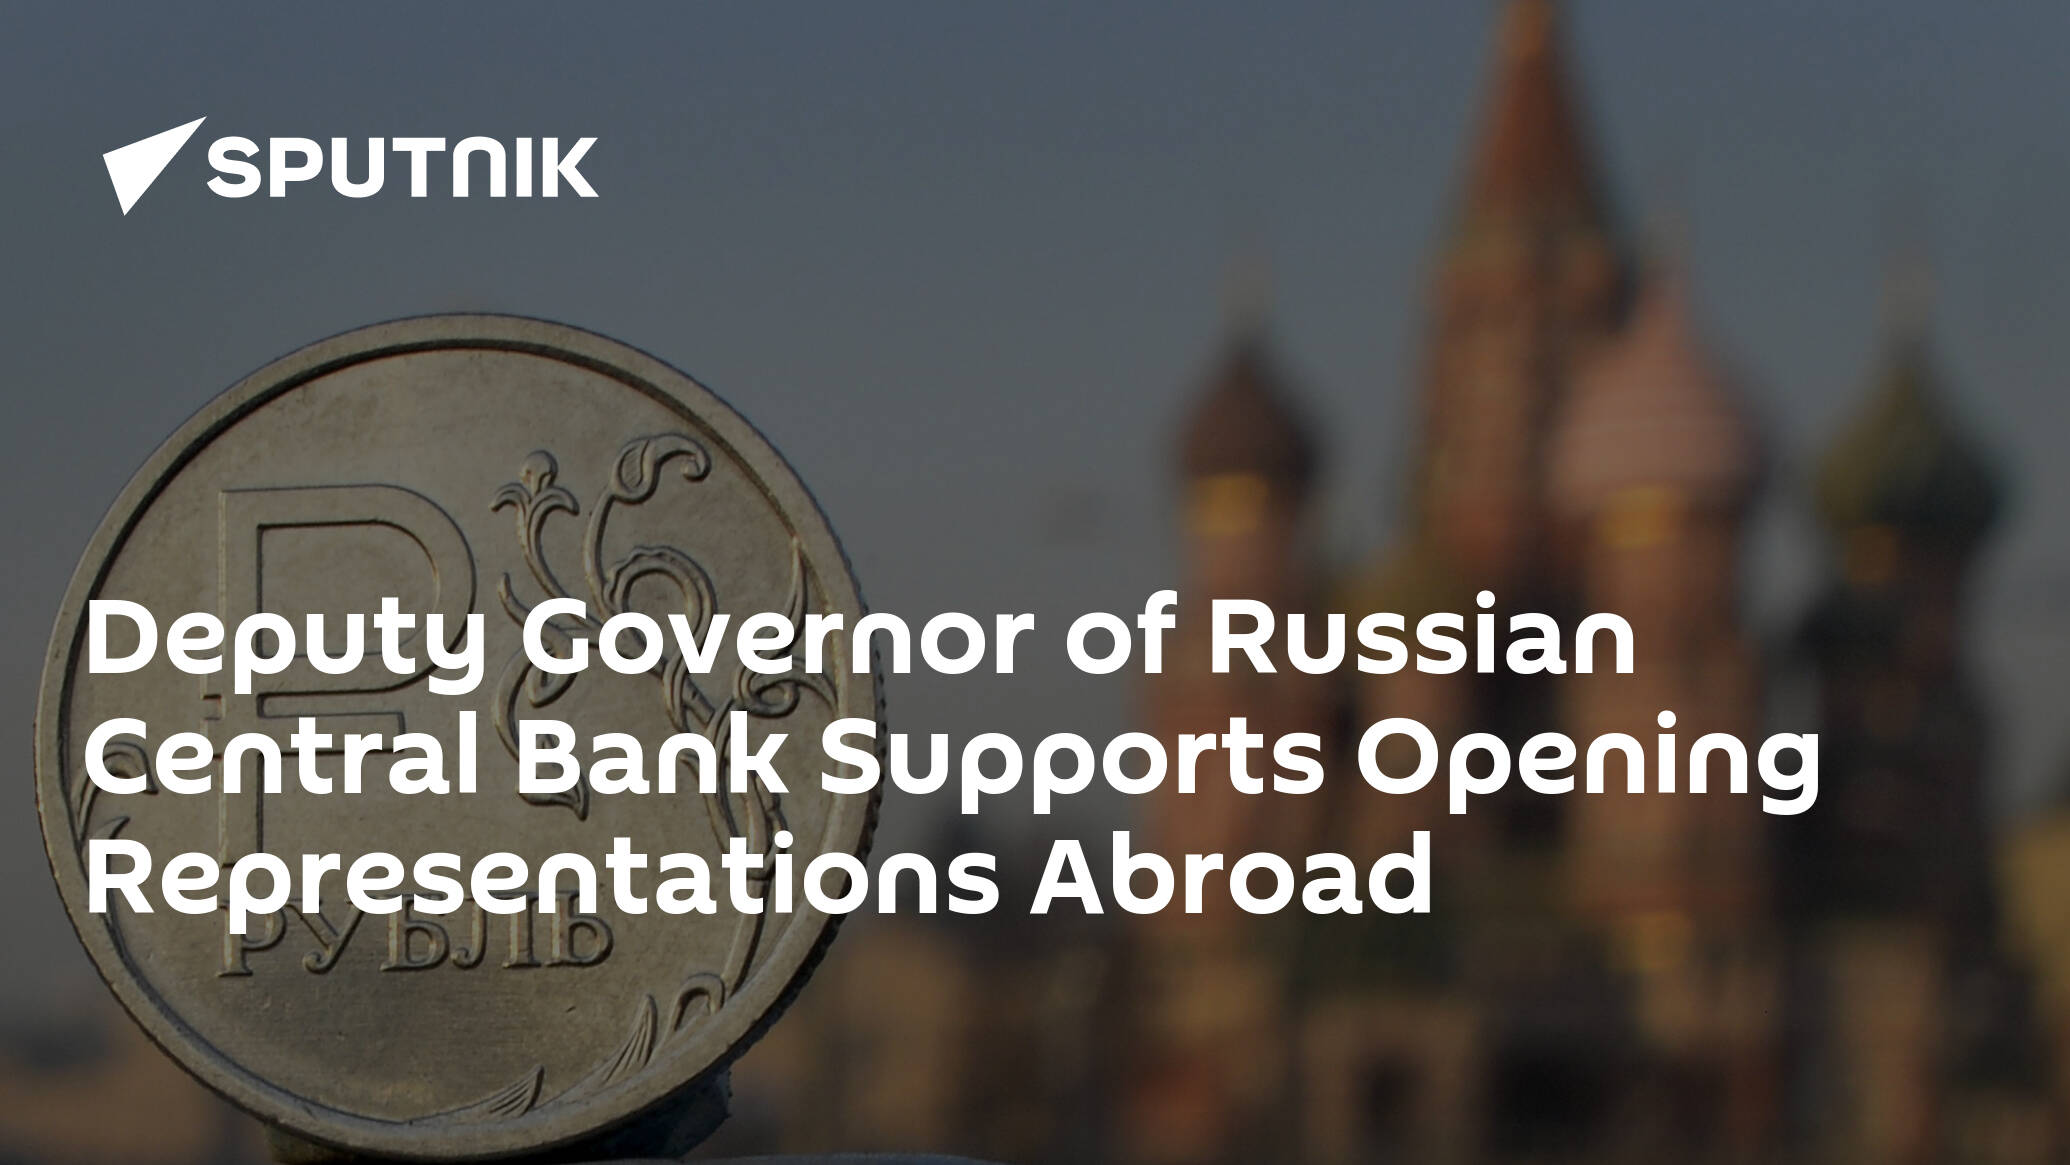 Deputy Governor of Russian Central Bank Supports Opening Representations Abroad